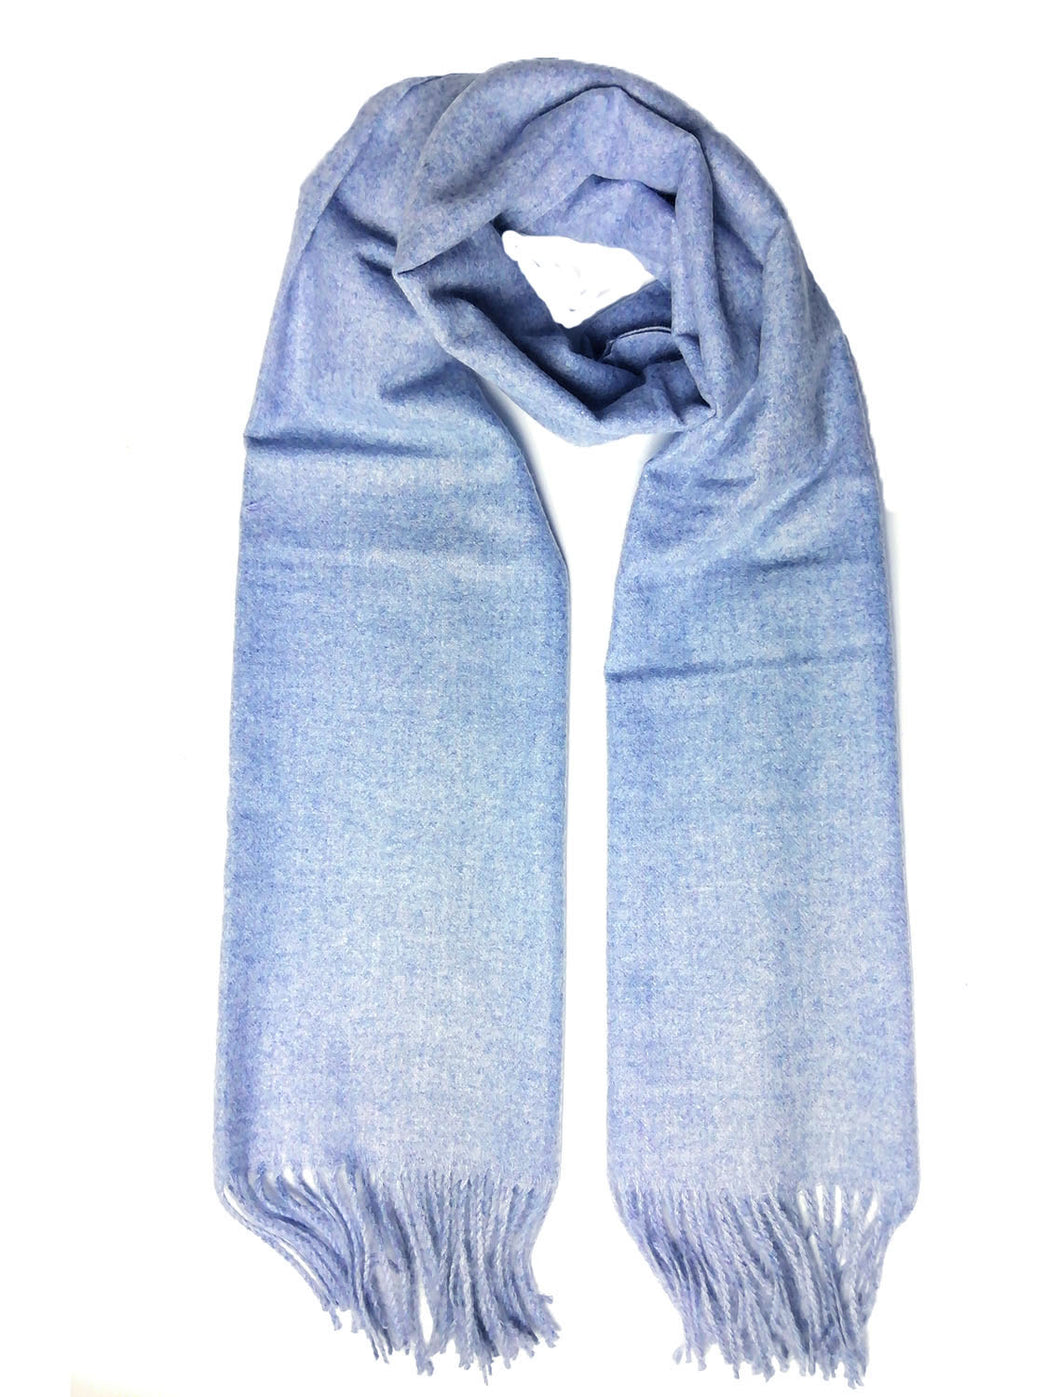 KGM Accessories large Pastel Super soft Cashmere Wool Blended shawl scarf